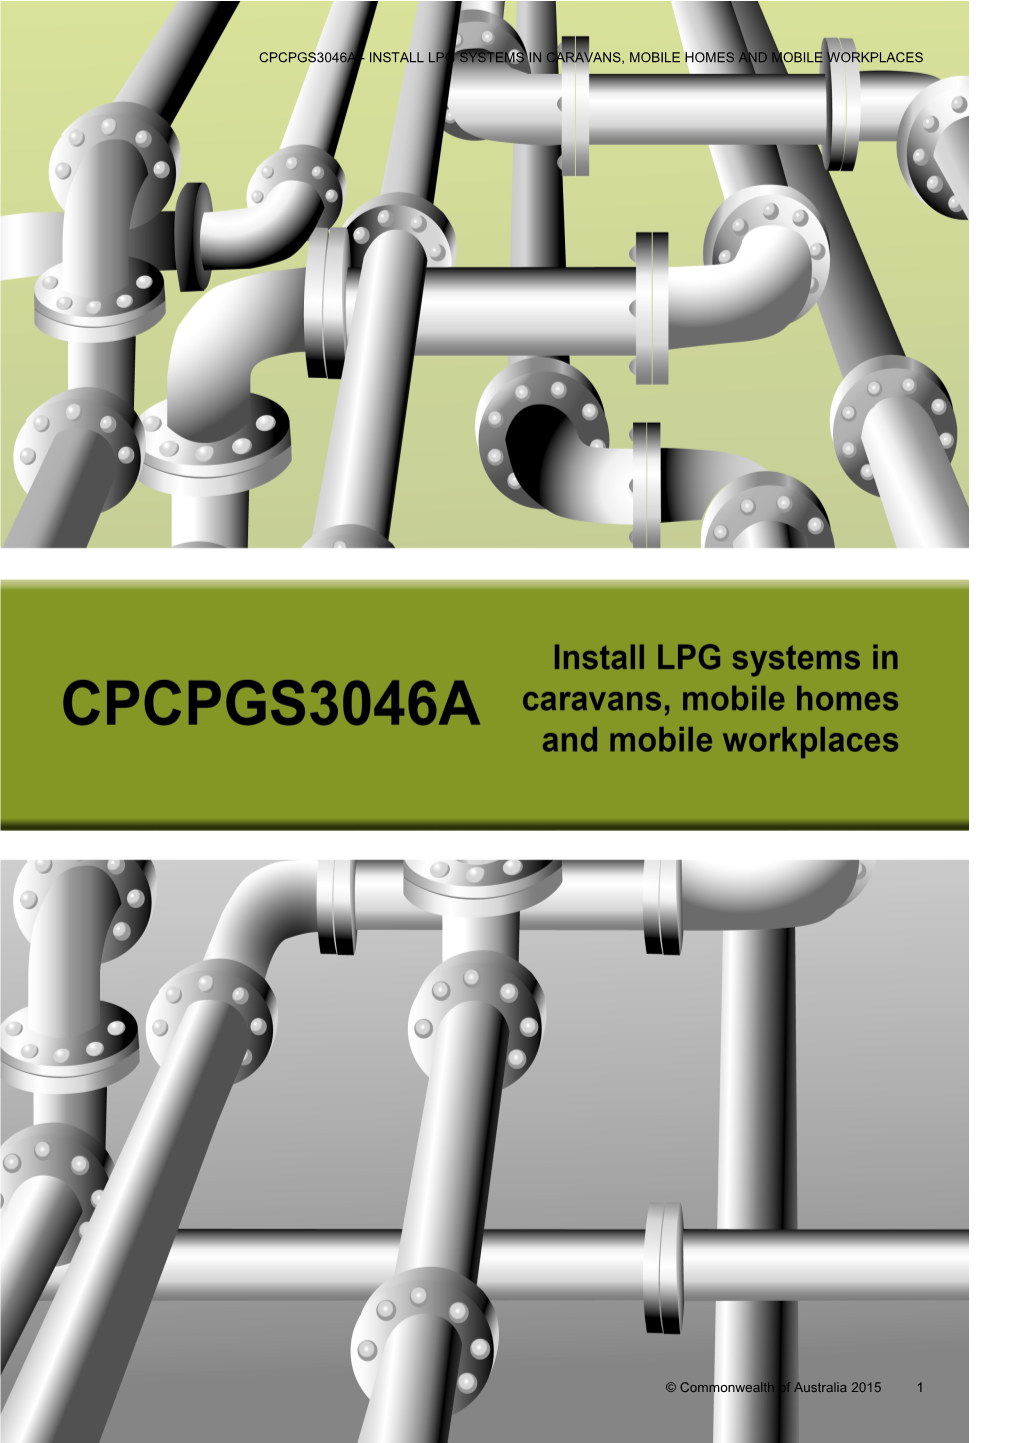 Cpcpgs3046a - Install Lpg Systems in Caravans, Mobile Homes and Mobile Workplaces